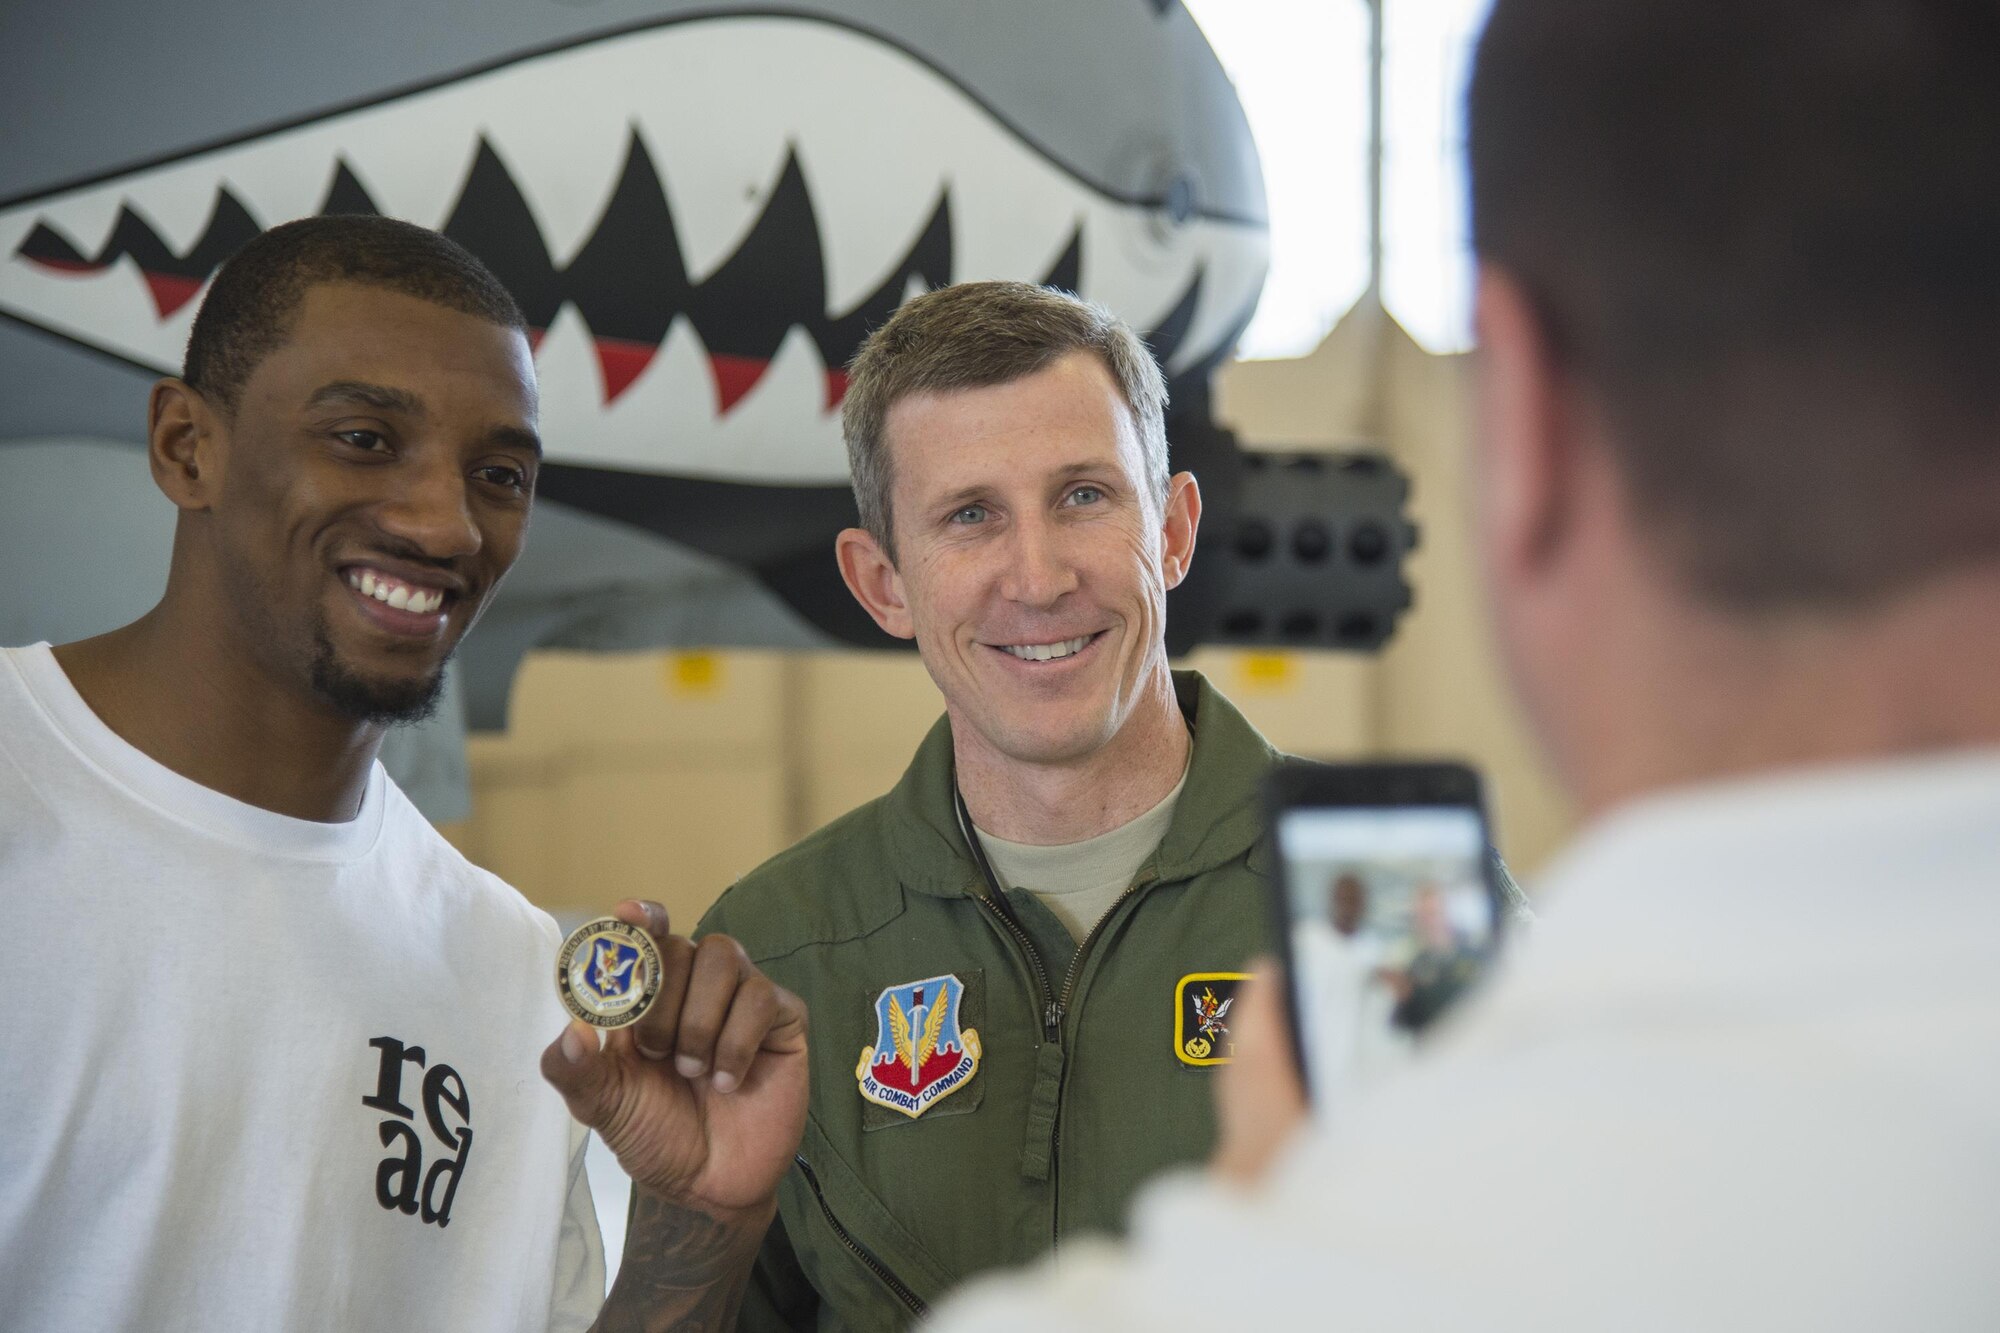 Malcolm Mitchell, left, New England Patriots’ wide receiver and Super Bowl LI Champion, and Col. Thomas Kunkel, 23d Wing commander, pose for a photo during his visit March 7, 2017, at Moody Air Force Base, Ga. Mitchell, a Valdosta native, got a glimpse of a typical day in the life of Moody Airmen. Mitchell also spent time with Airmen and signed autographs for local Patriots’ fans during his visit. (U.S. Air Force photo by Senior Airman Ceaira Young)